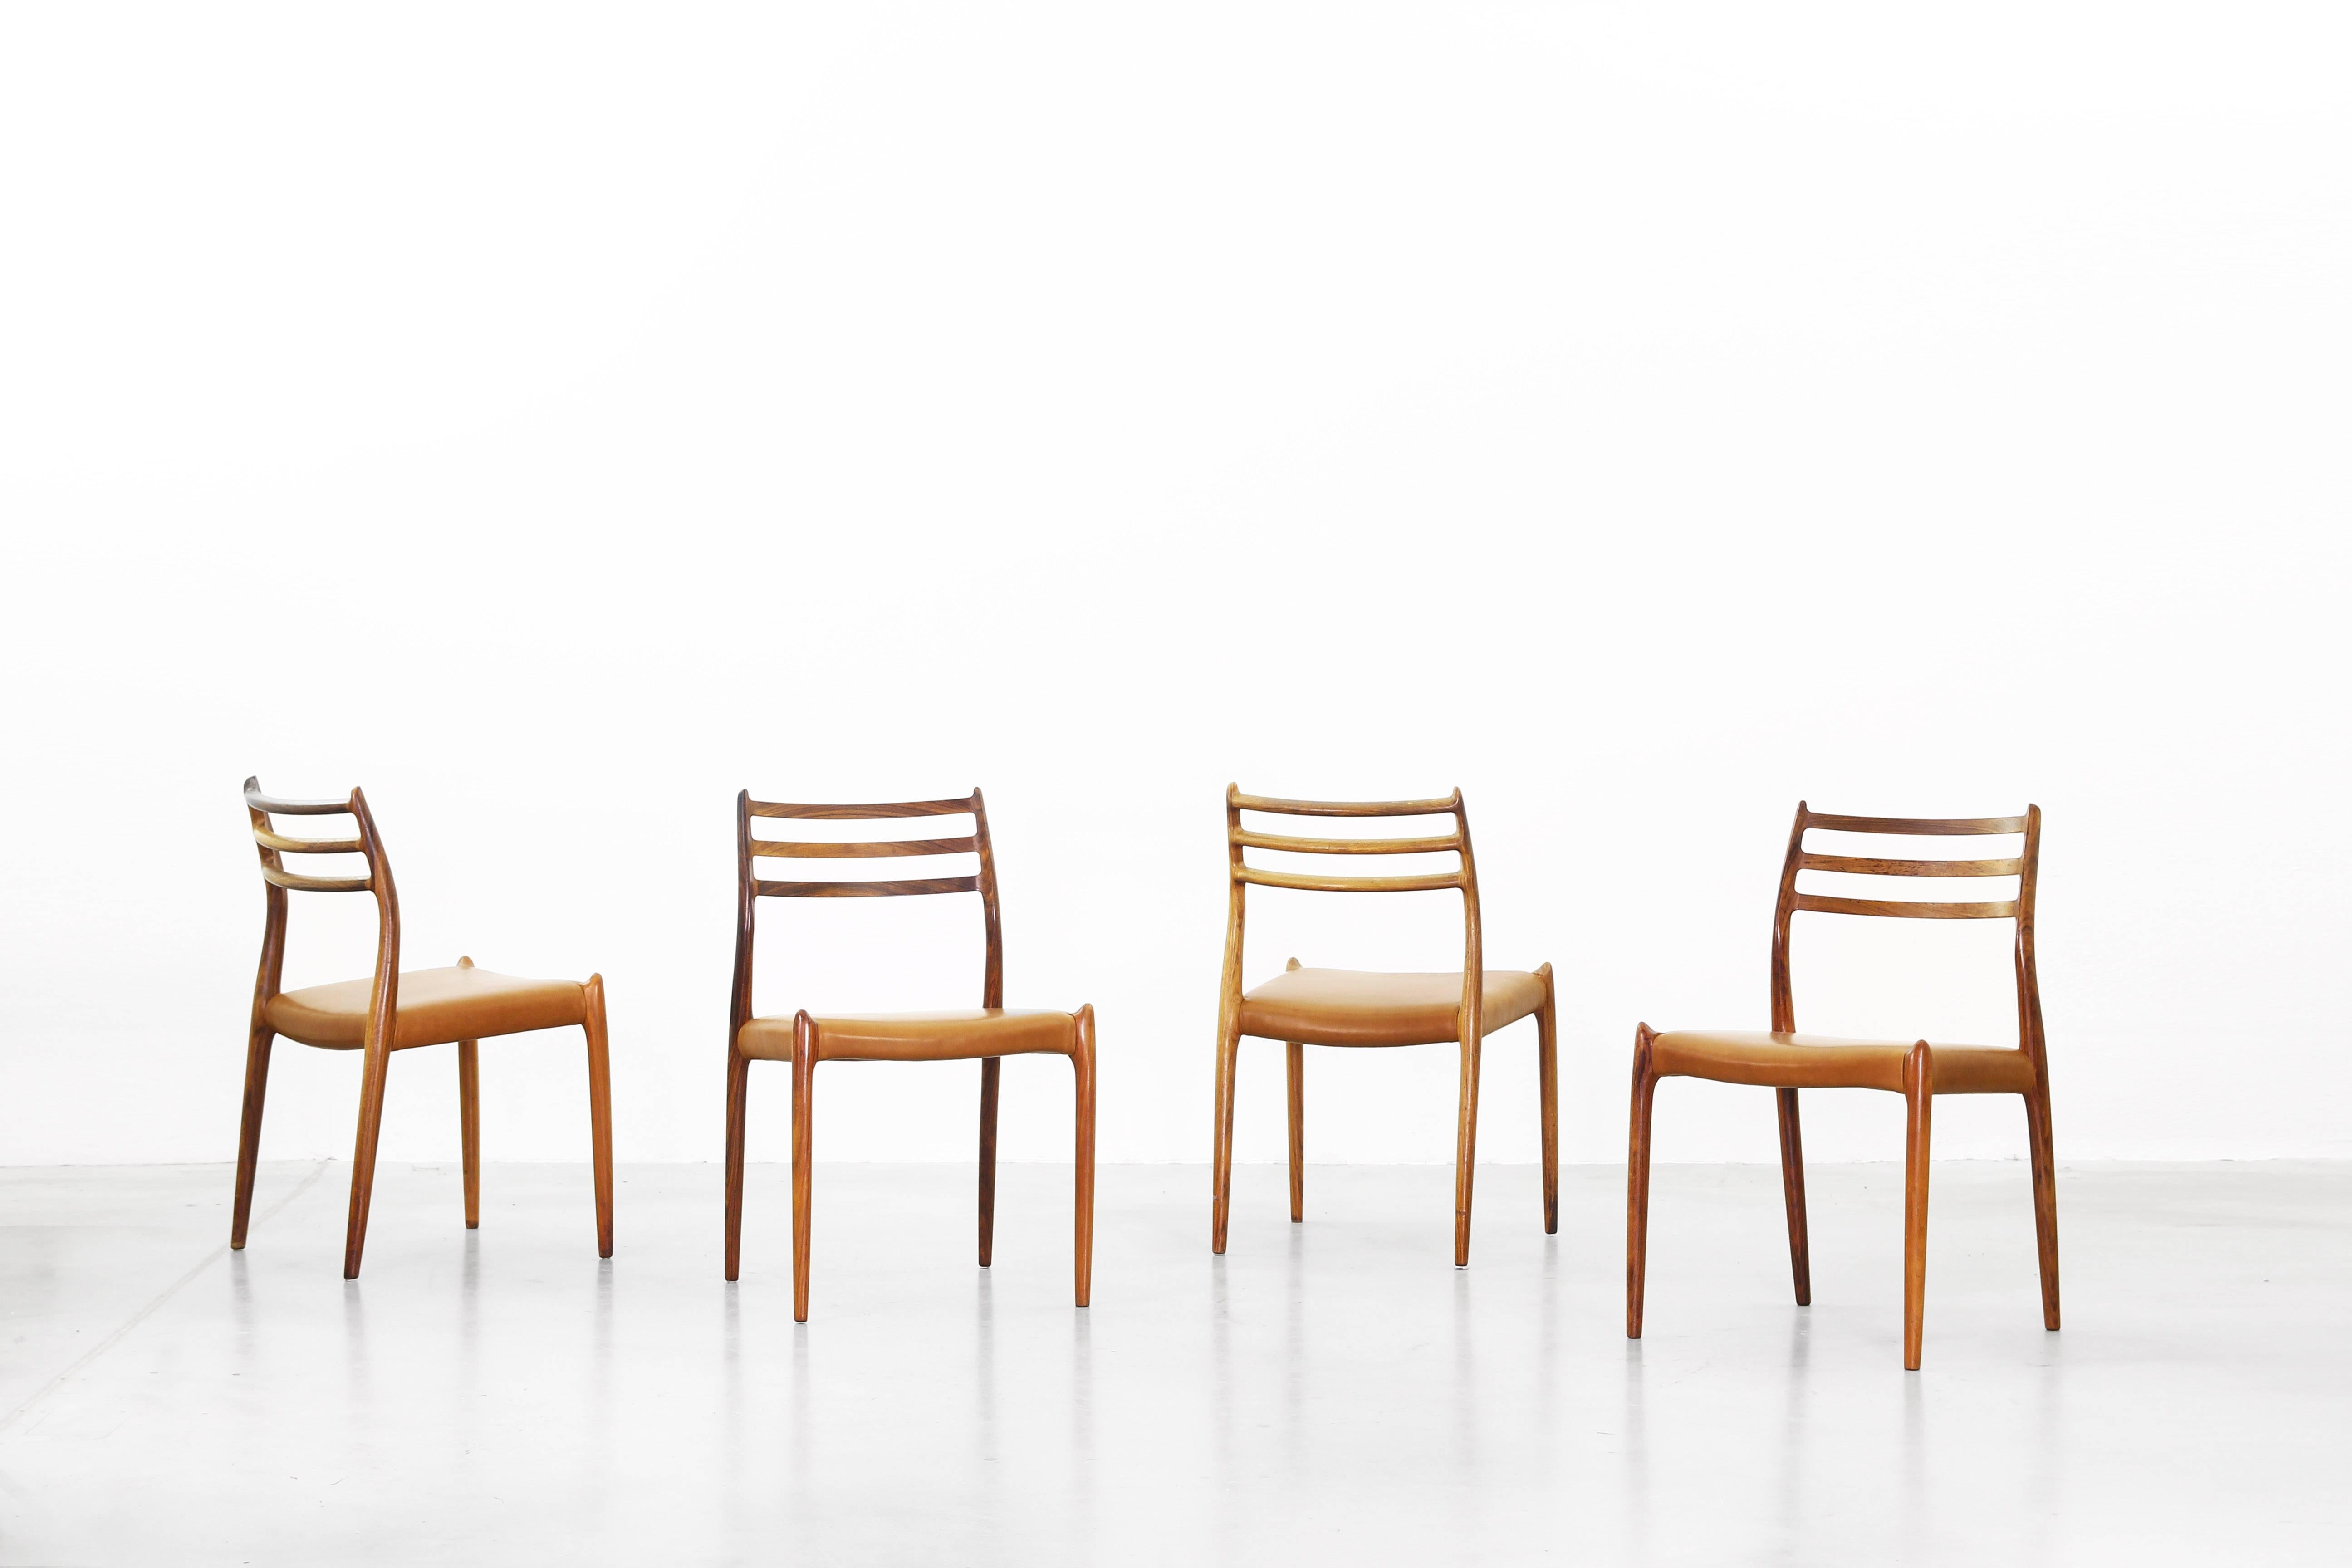 A set of beautiful dining chairs by Niels Møller Mod. 78 (old version), made in Denmark. All chairs are in an excellent condition and are made of dark wood and brown-cognac leather.